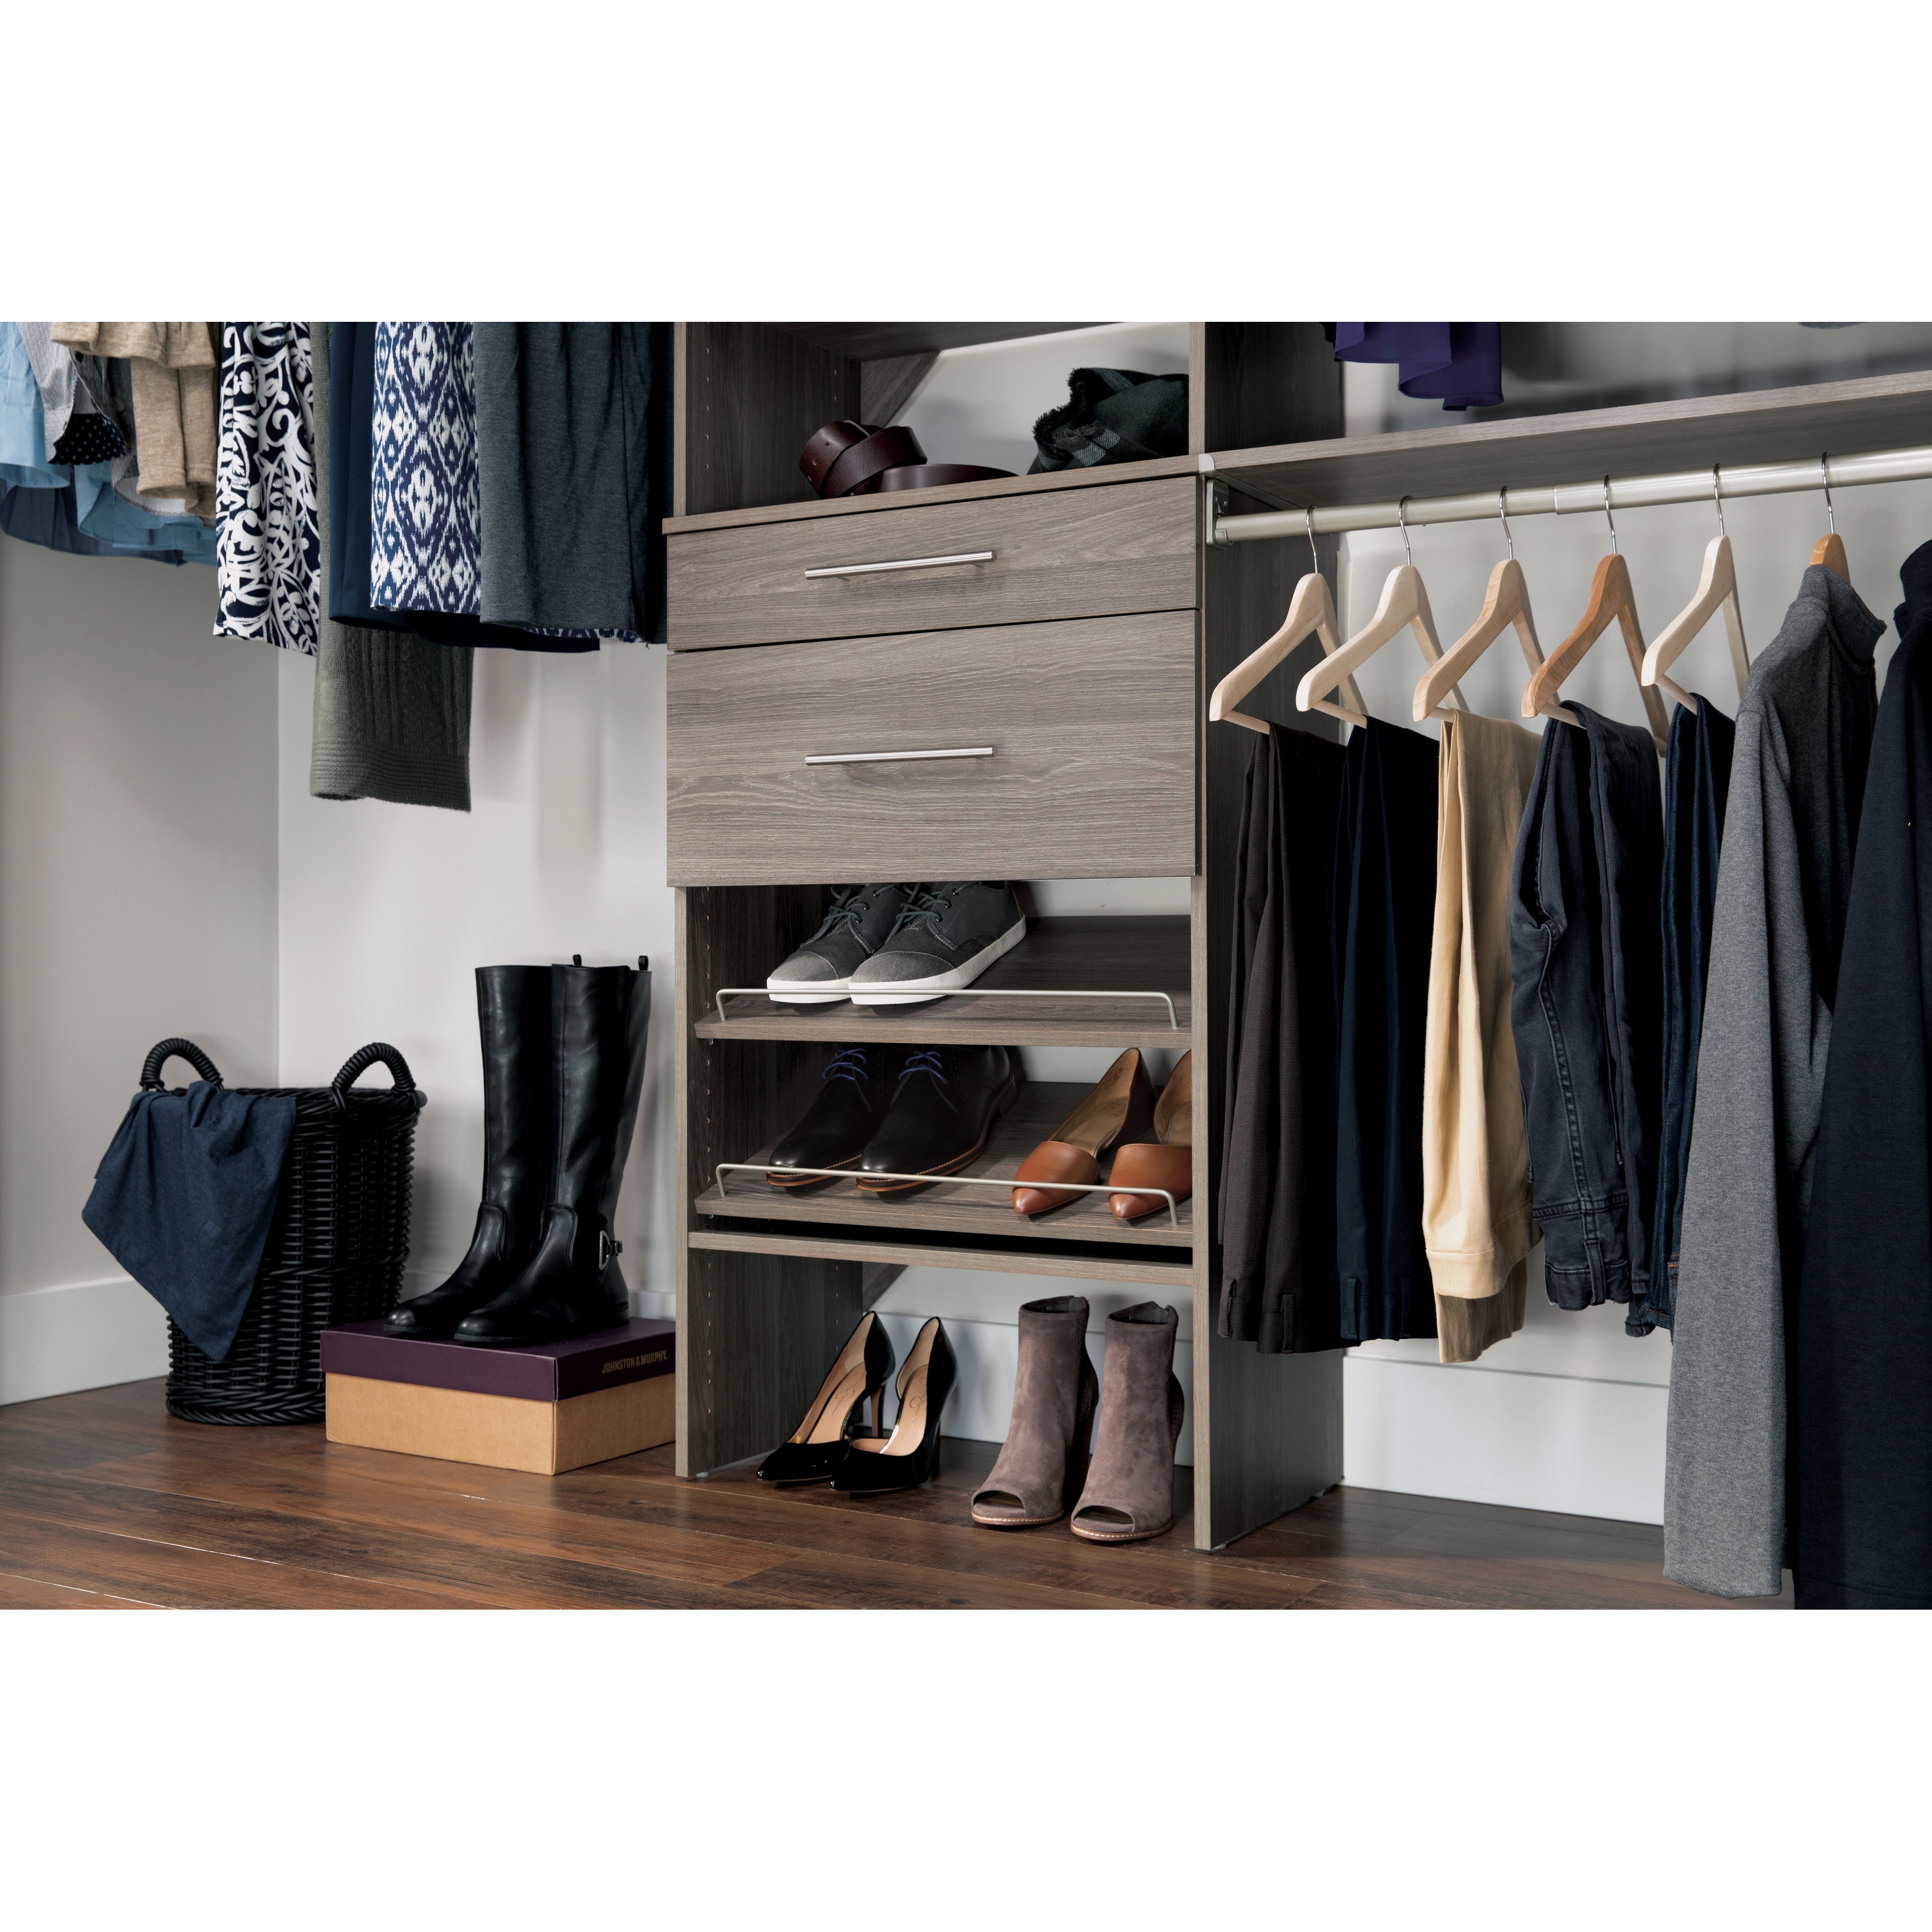 https://ak1.ostkcdn.com/images/products/is/images/direct/1149ab948ad19b55b92914eac9f6a69584dd85d1/ClosetMaid-SuiteSymphony-25-Inch-Wide-Angled-Shoe-Shelves.jpg